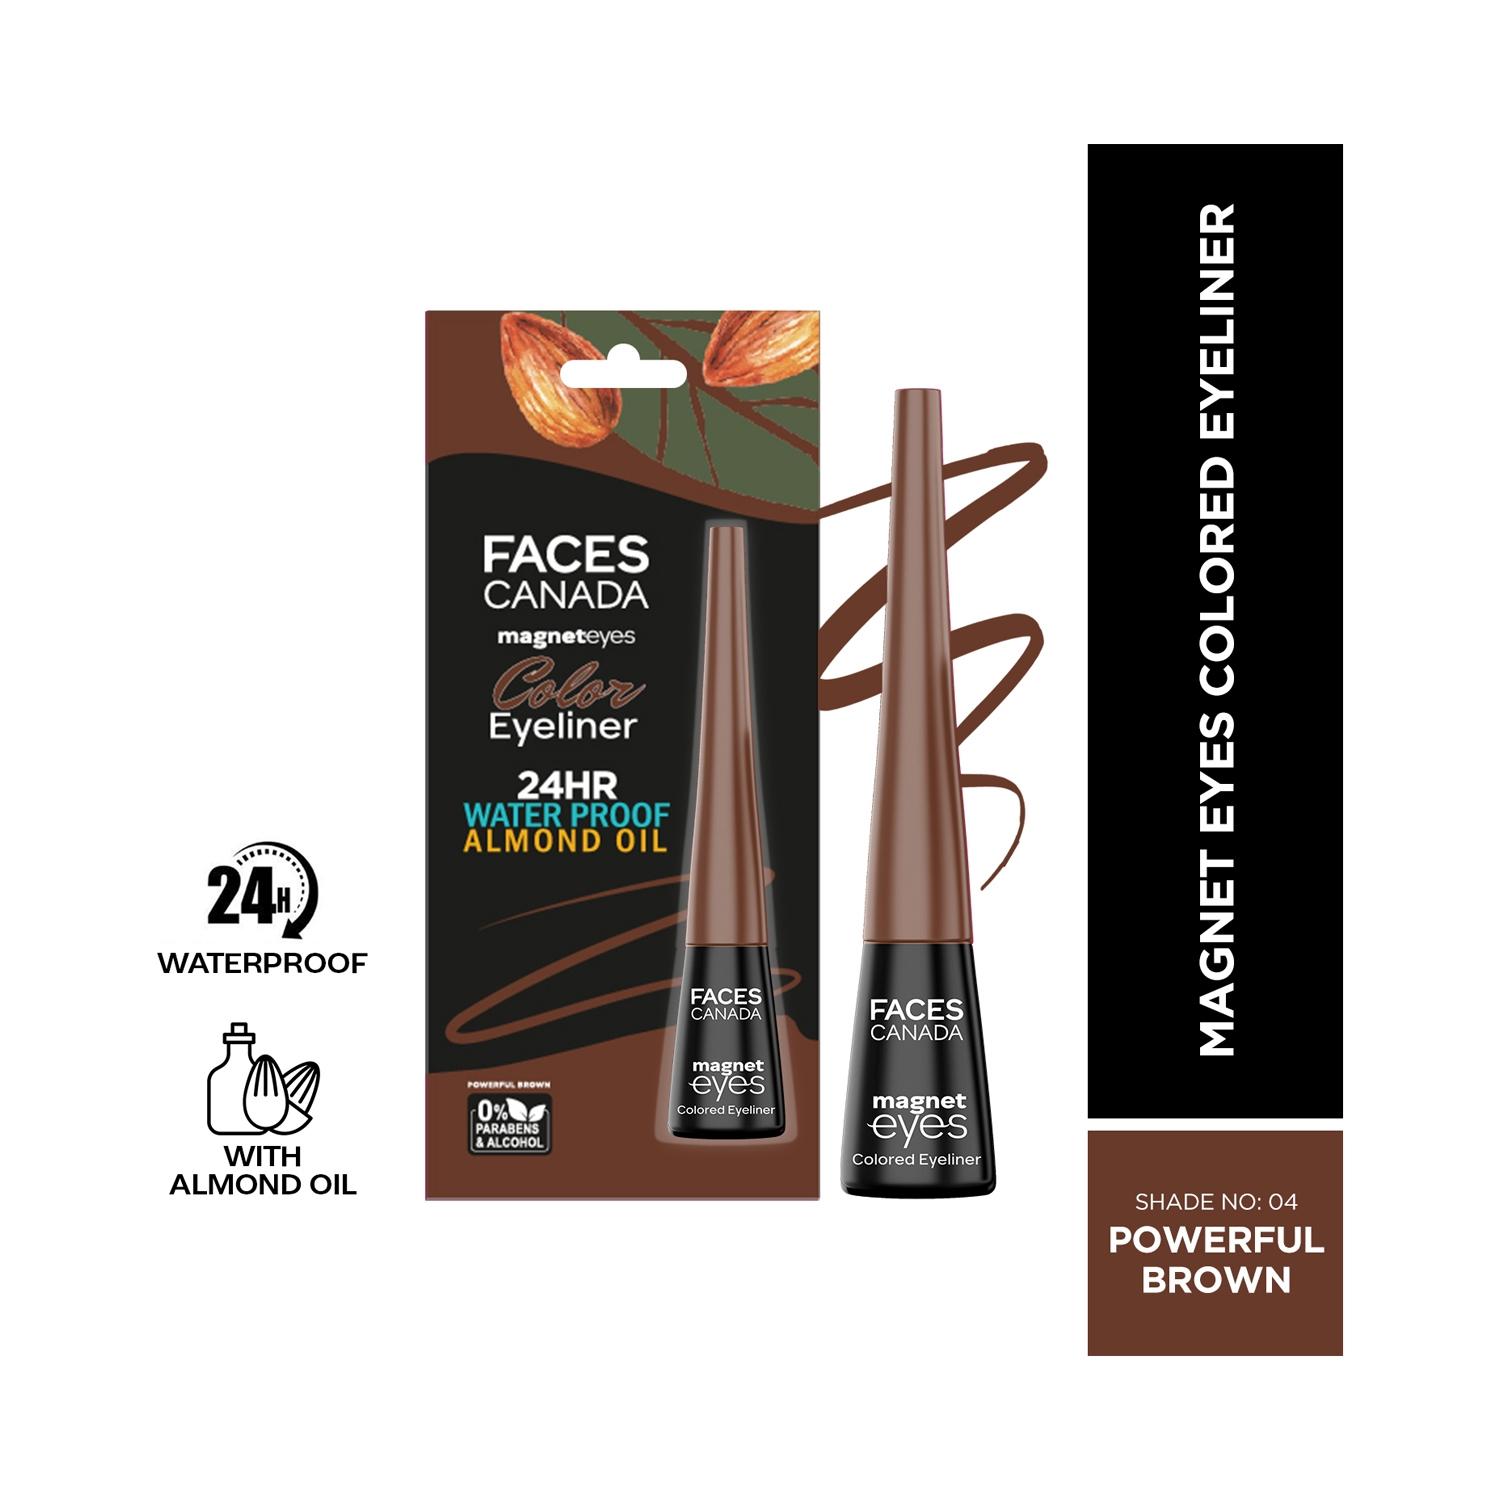 faces canada magneteyes colored eyeliner - 04 powerful brown (4ml)